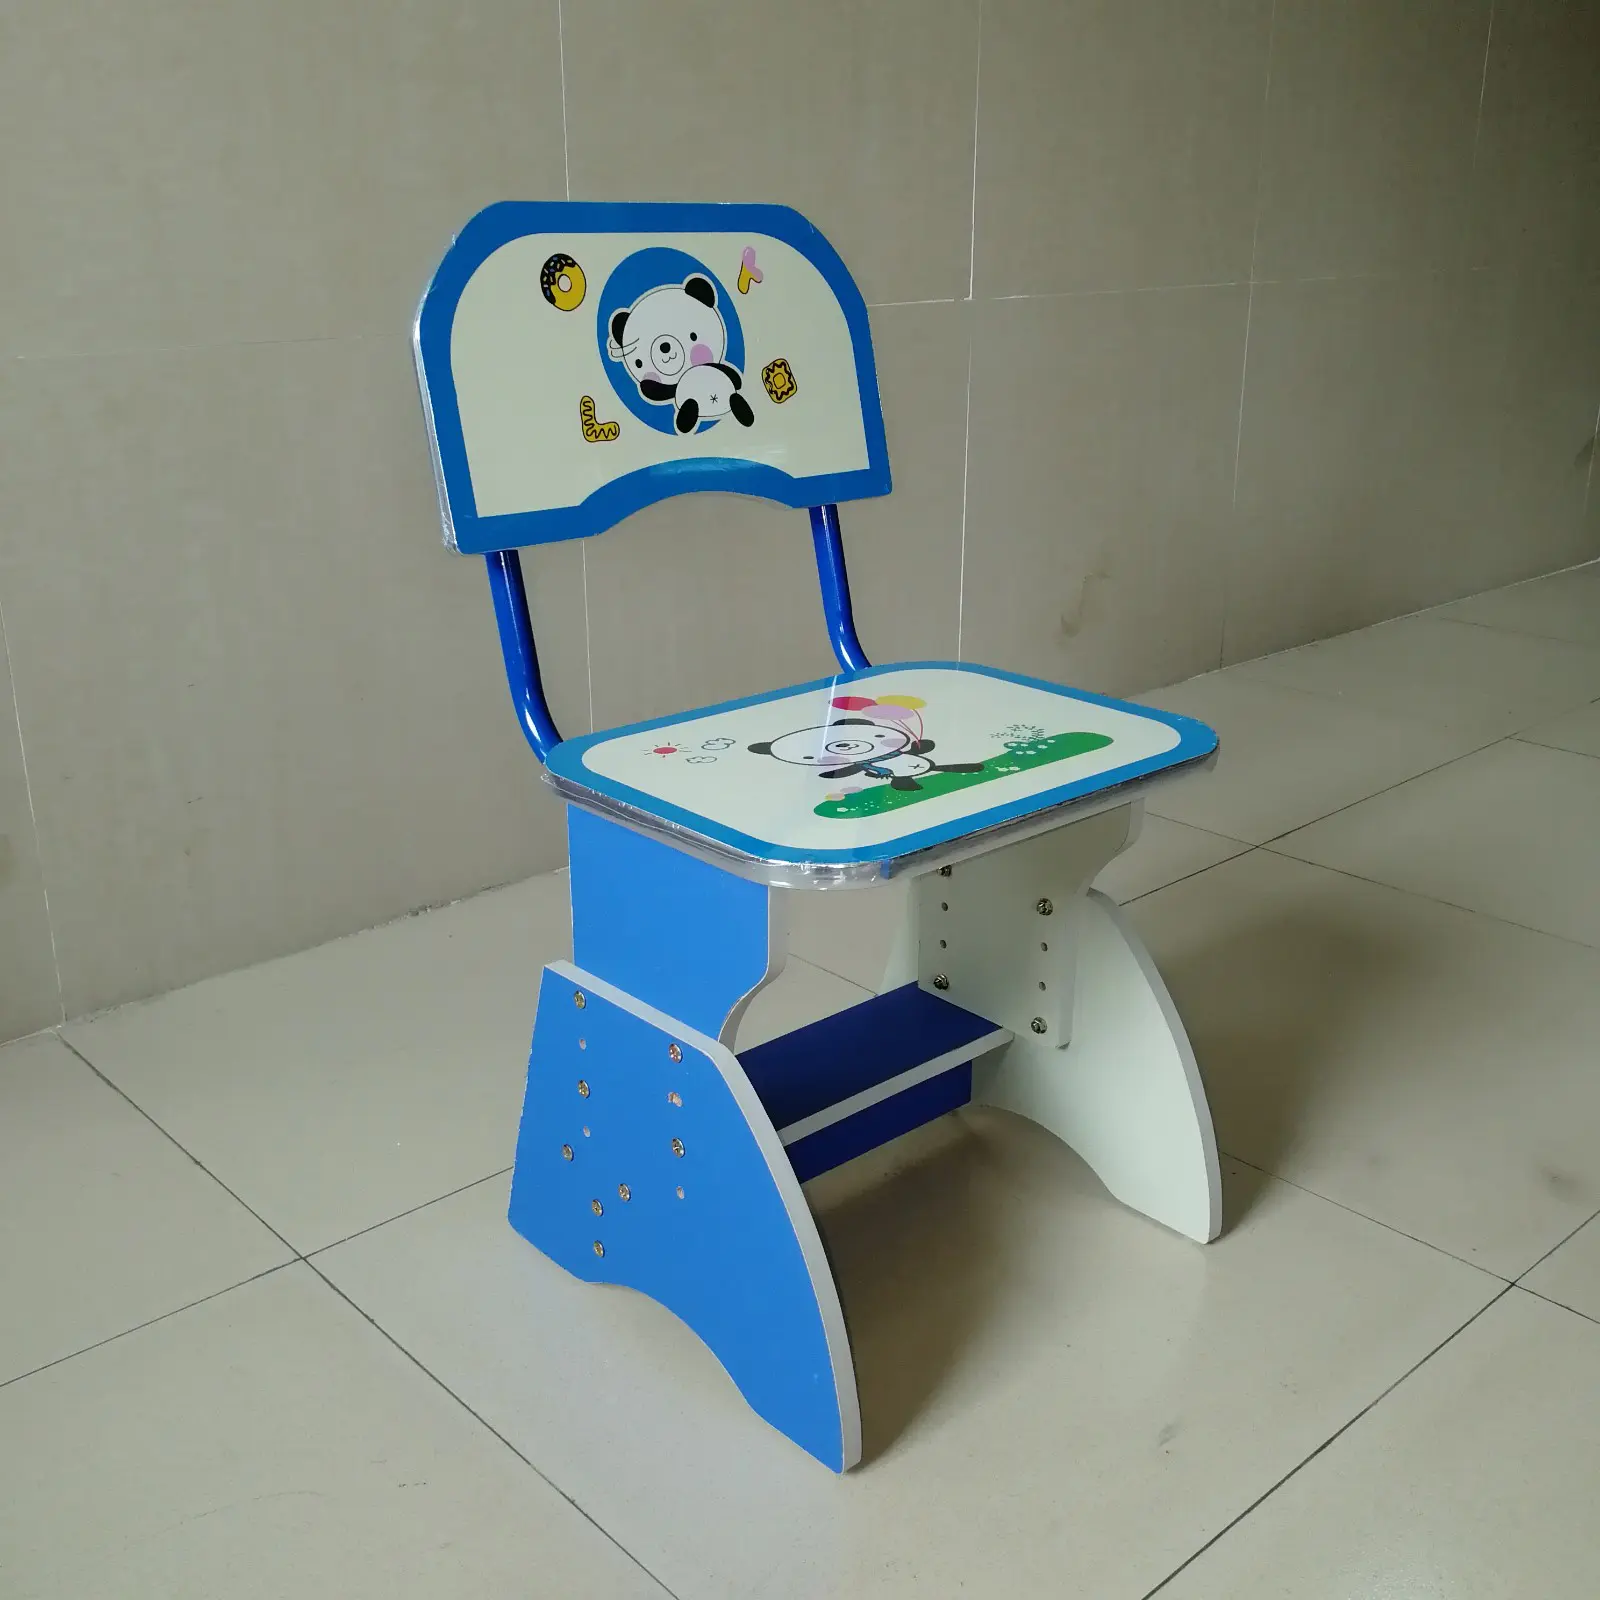 learning foldable children's study table and chair study preschool Aoqi company